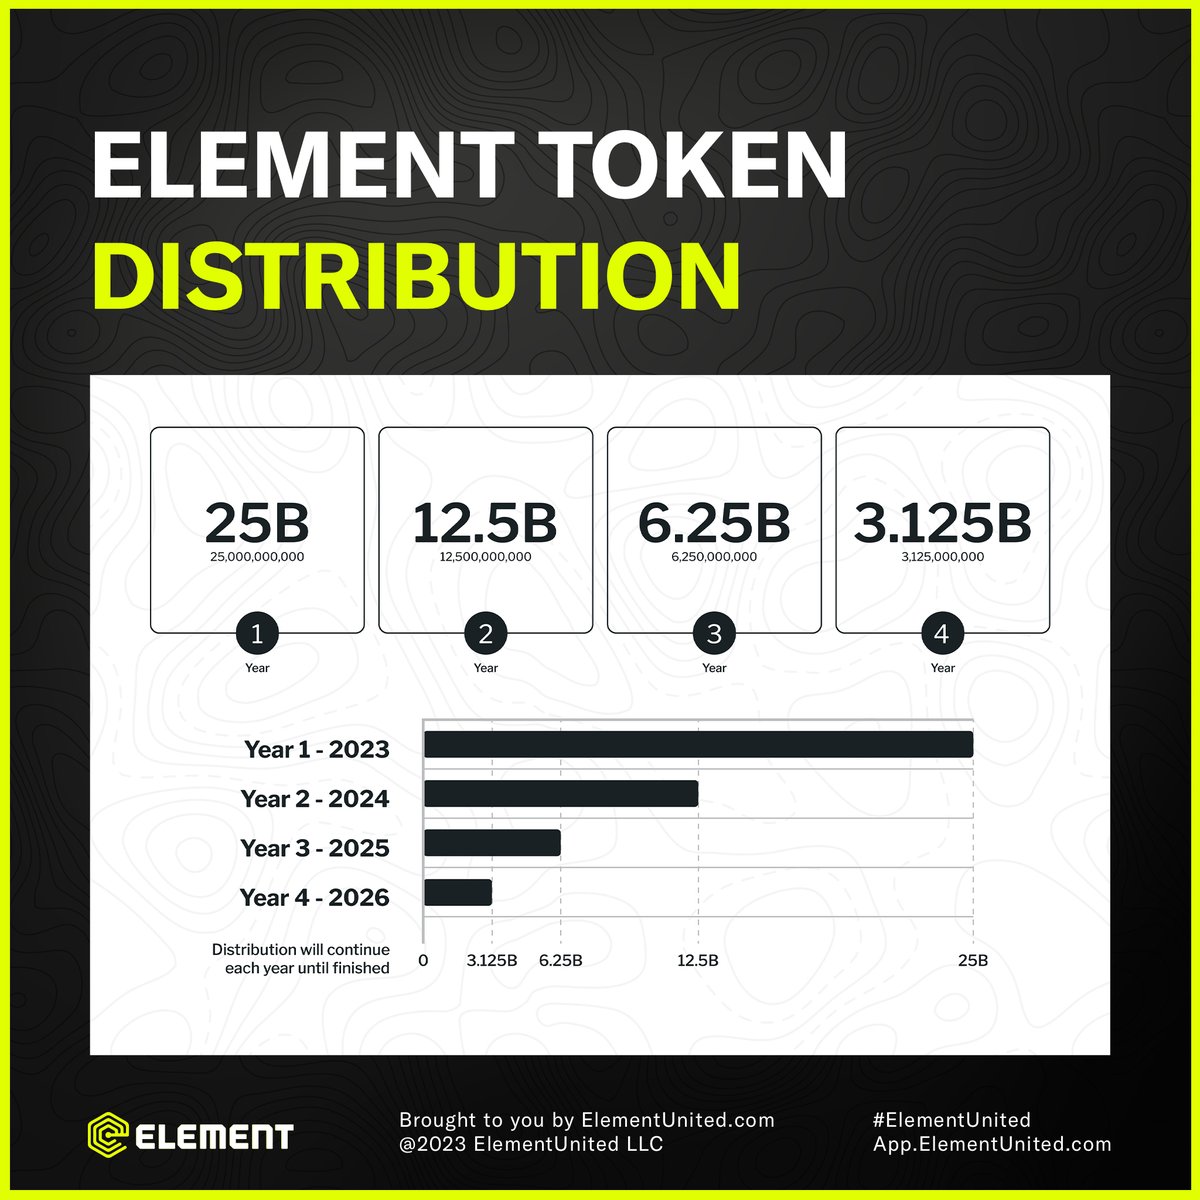 Attention Element Community! Mark your calendars 🗓: The much-anticipated token distribution halving event for Element is now set for March 16th, adjusted to accommodate Leap Day. Look for it this Saturday!